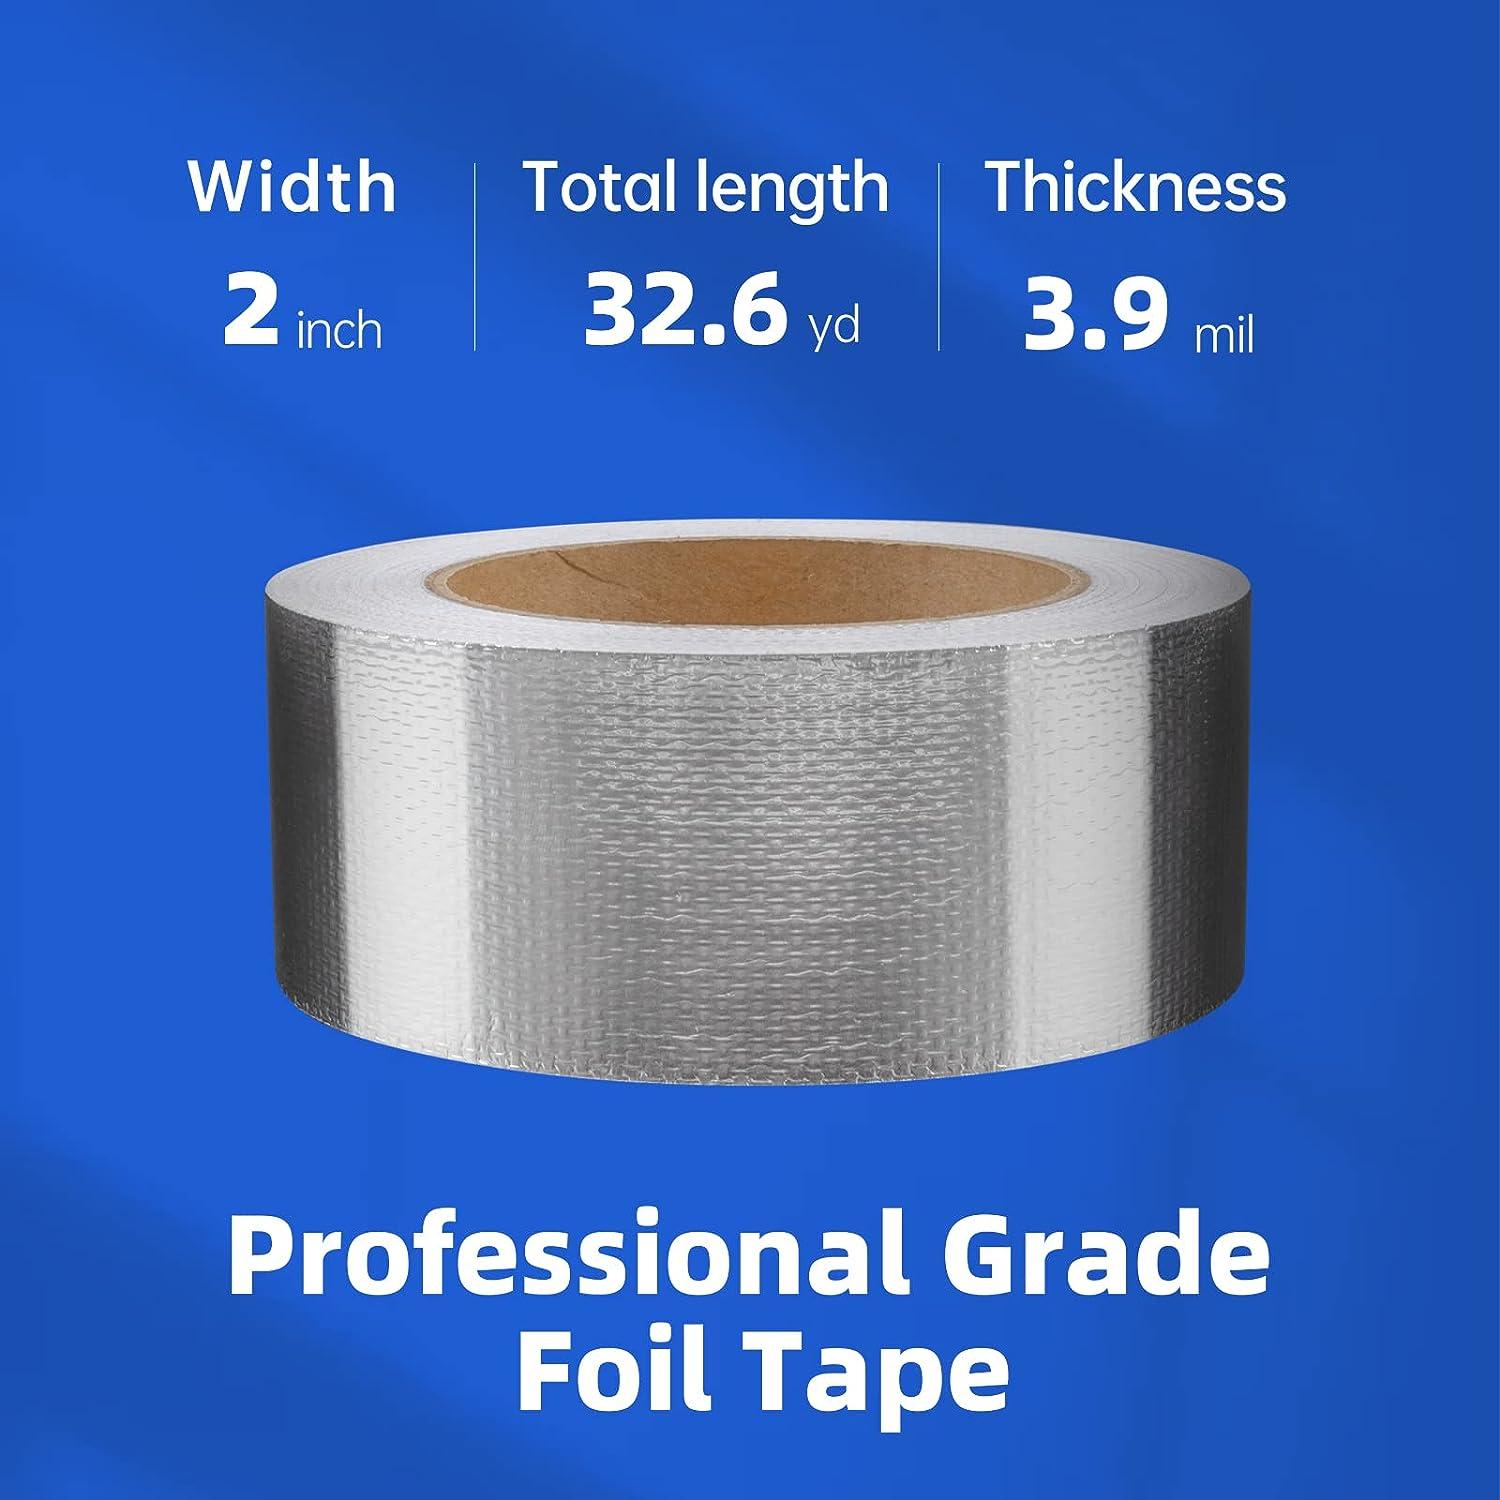 NEZUIBAN Aluminum Foil Tape,2Inch by98Feet(32.6yards) 3.9Mil Insulation Heat  Resistant Tape Perfect for HVAC, Dryer Vents,Sealing & Patching Hot & Cold  Air Ducts